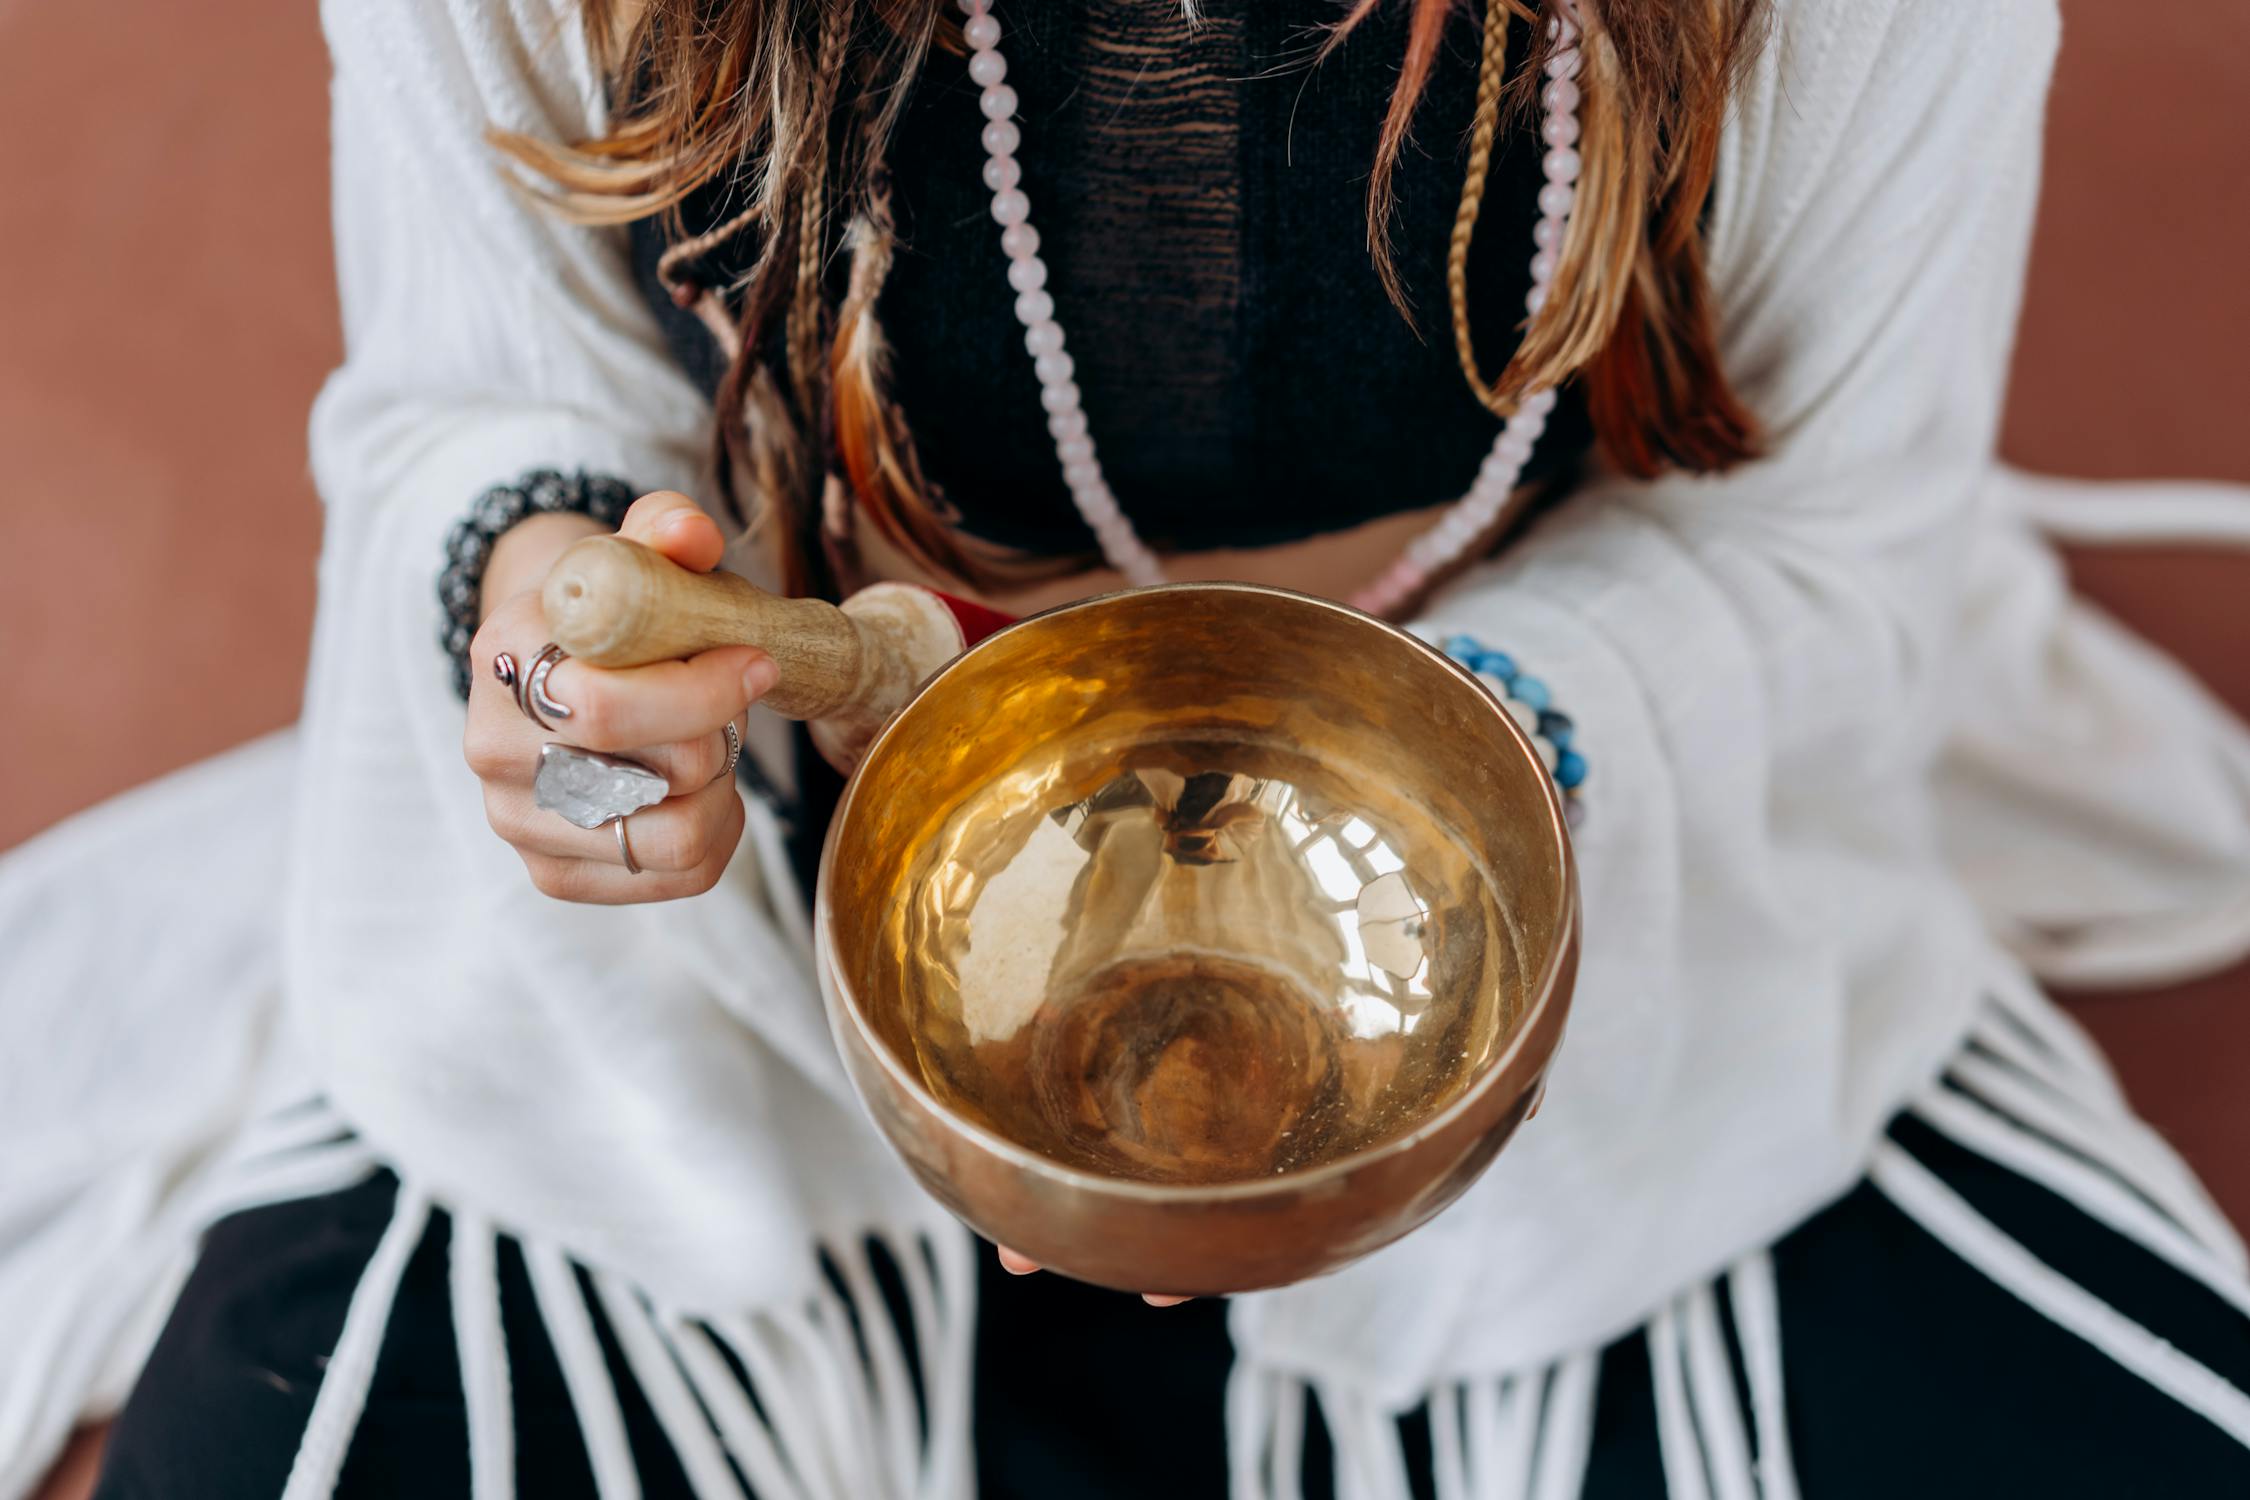 Woman sits with a singing bowl for meditation